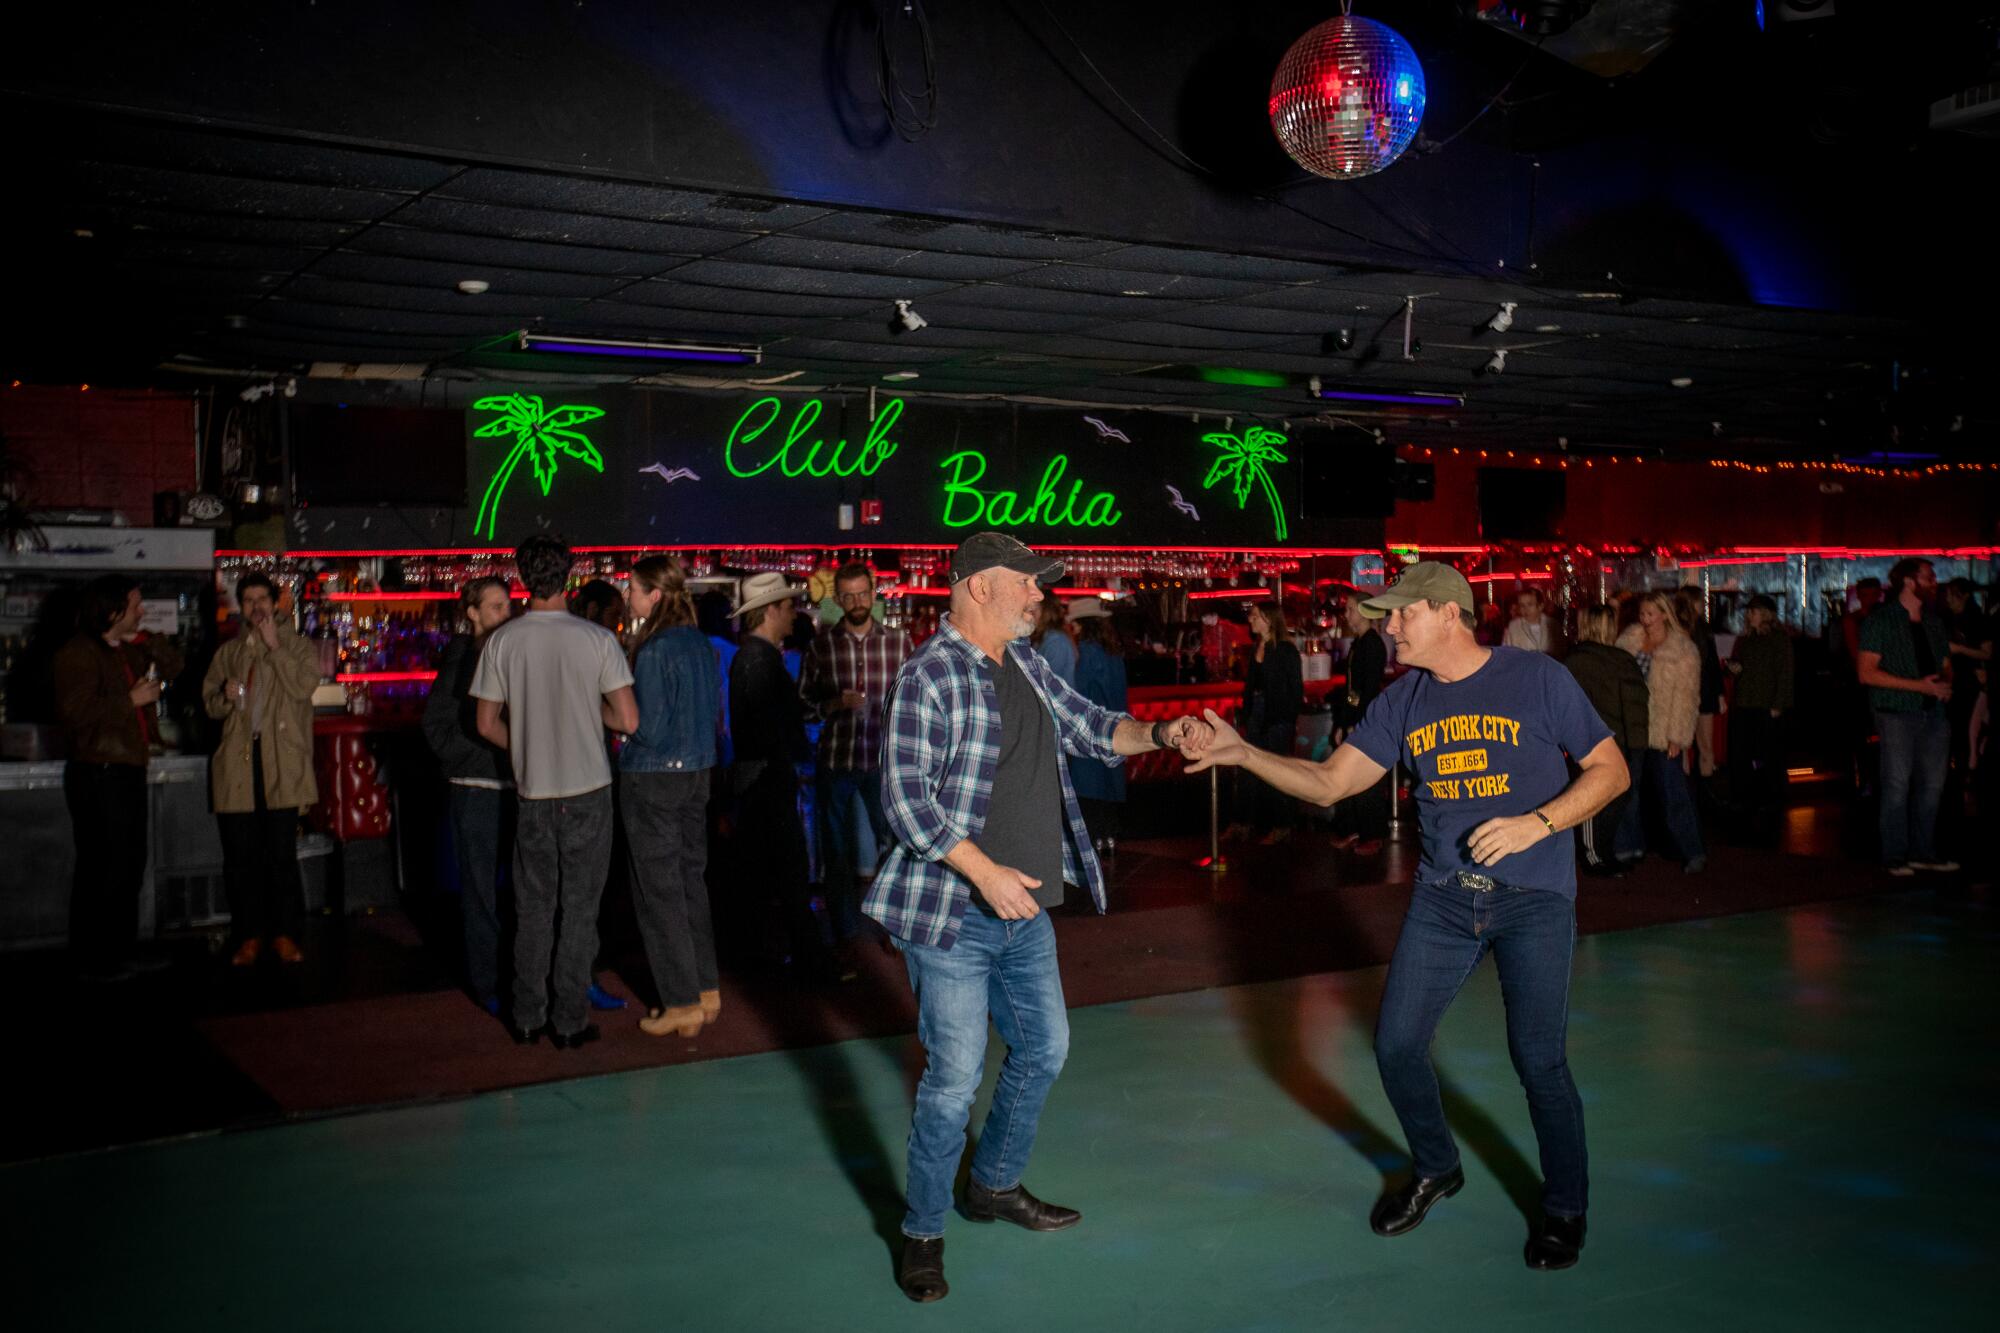 People begin to fill the dance floor for another night of Stud Country line dancing.